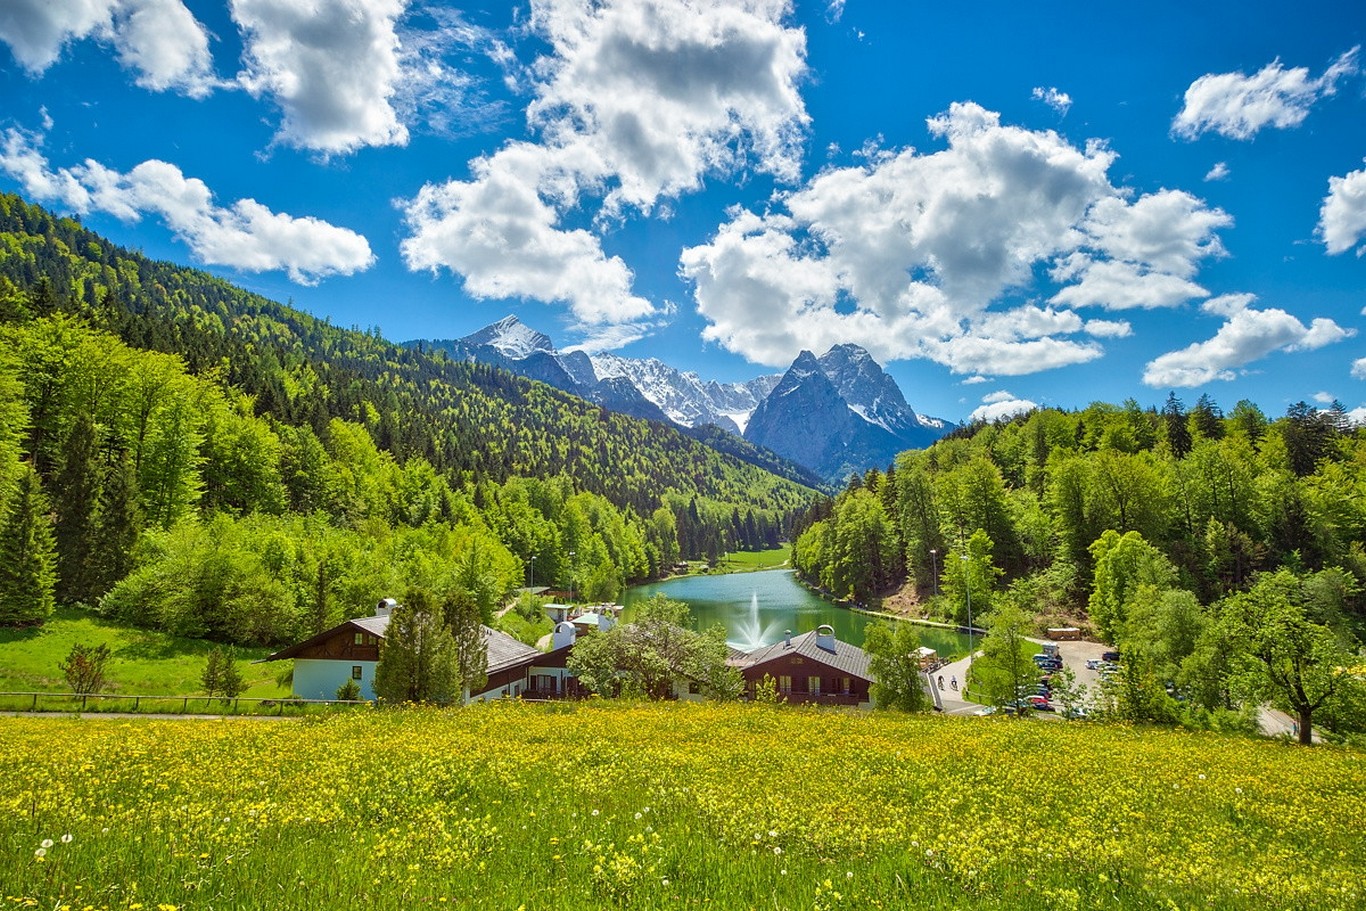 General 1366x911 lake Germany summer clouds green house wildflowers mountains forest nature landscape field